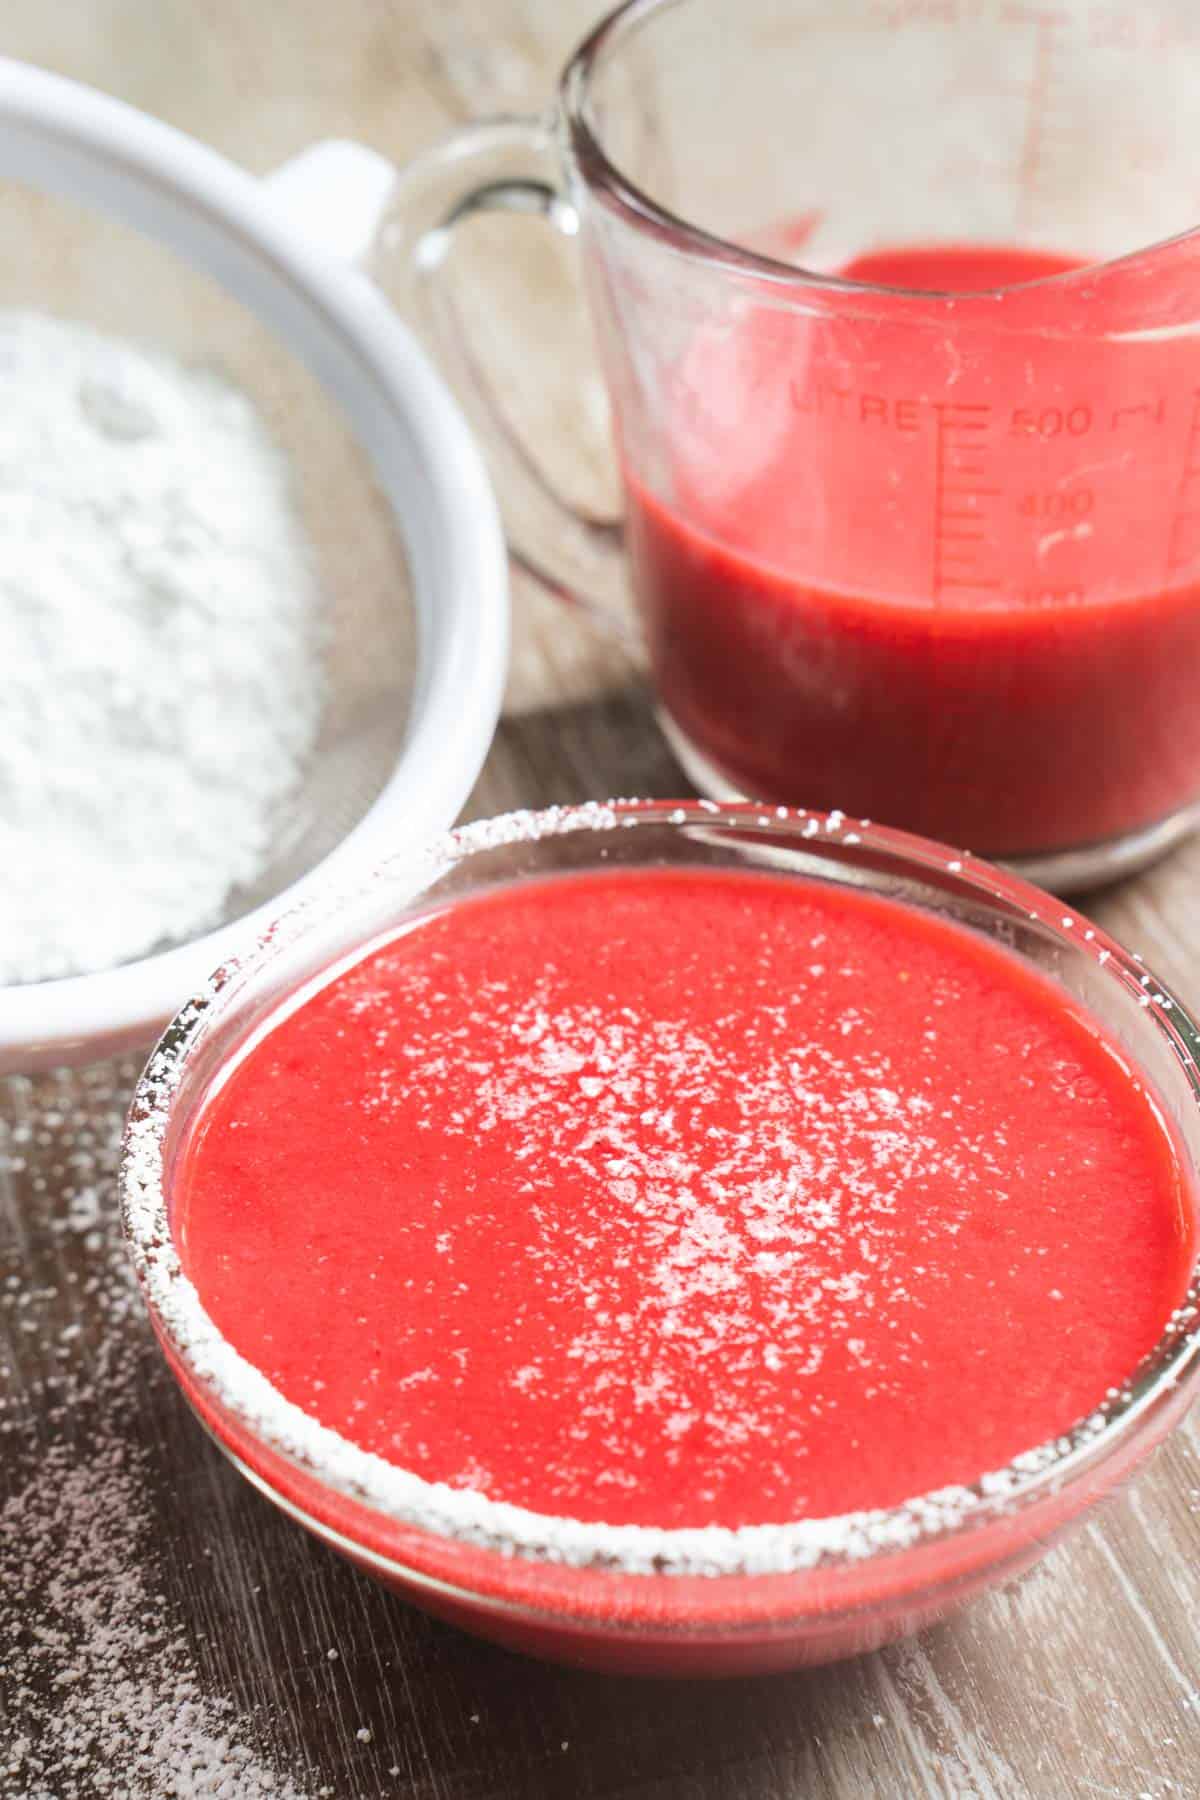 Raspberry puree in a bowl and in a 2 cup measuring cup along side a sieve filled with powdered sugar on a wooden table